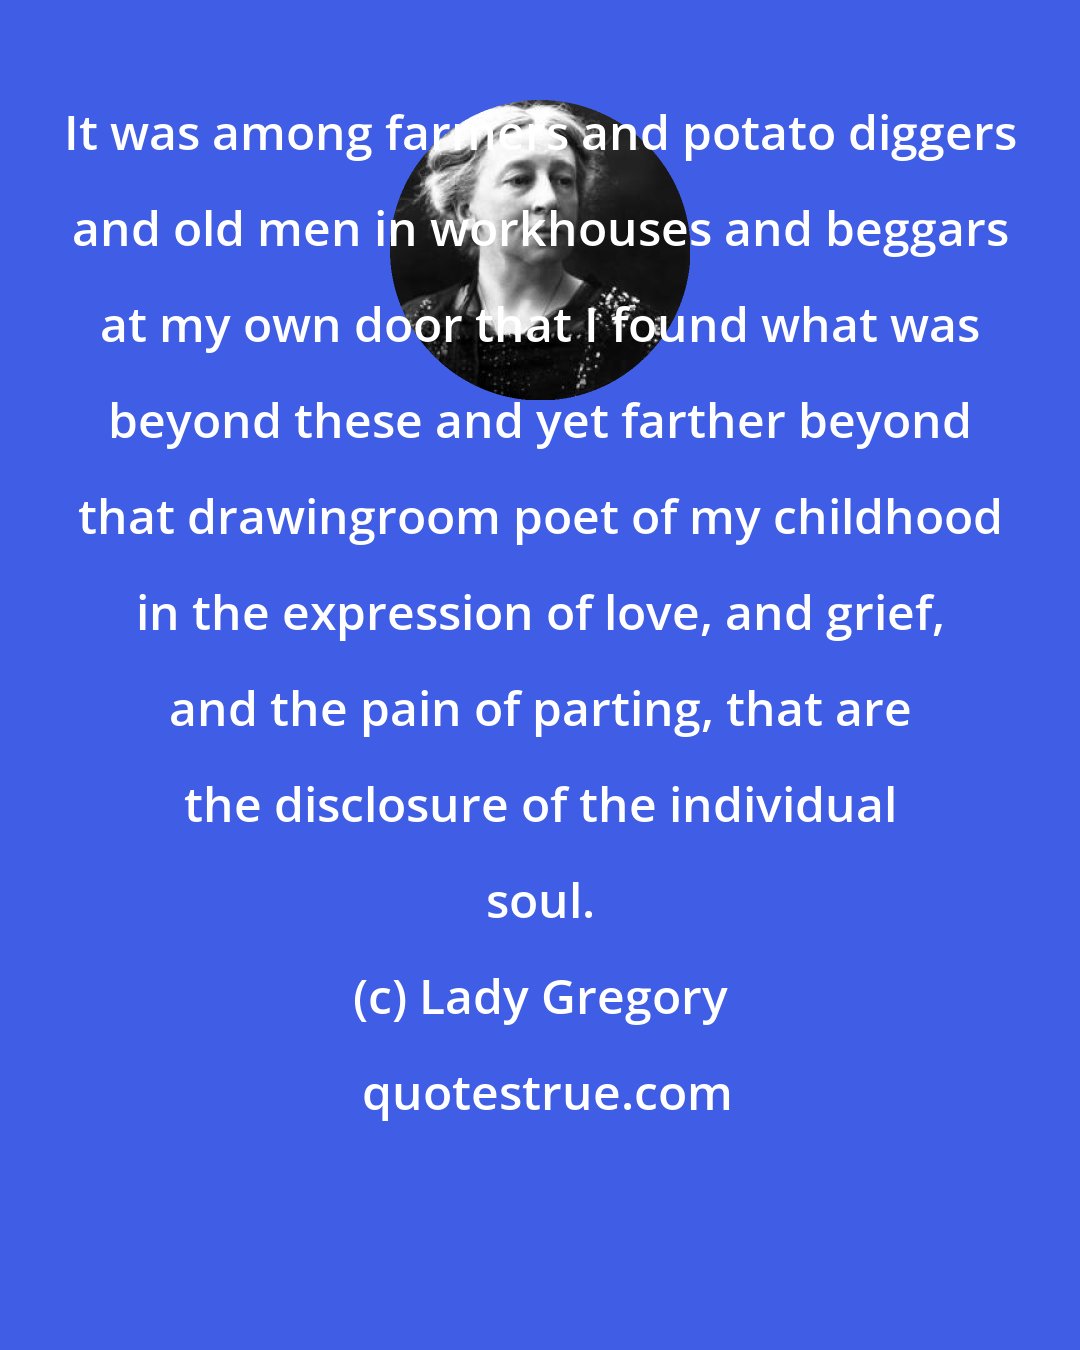 Lady Gregory: It was among farmers and potato diggers and old men in workhouses and beggars at my own door that I found what was beyond these and yet farther beyond that drawingroom poet of my childhood in the expression of love, and grief, and the pain of parting, that are the disclosure of the individual soul.